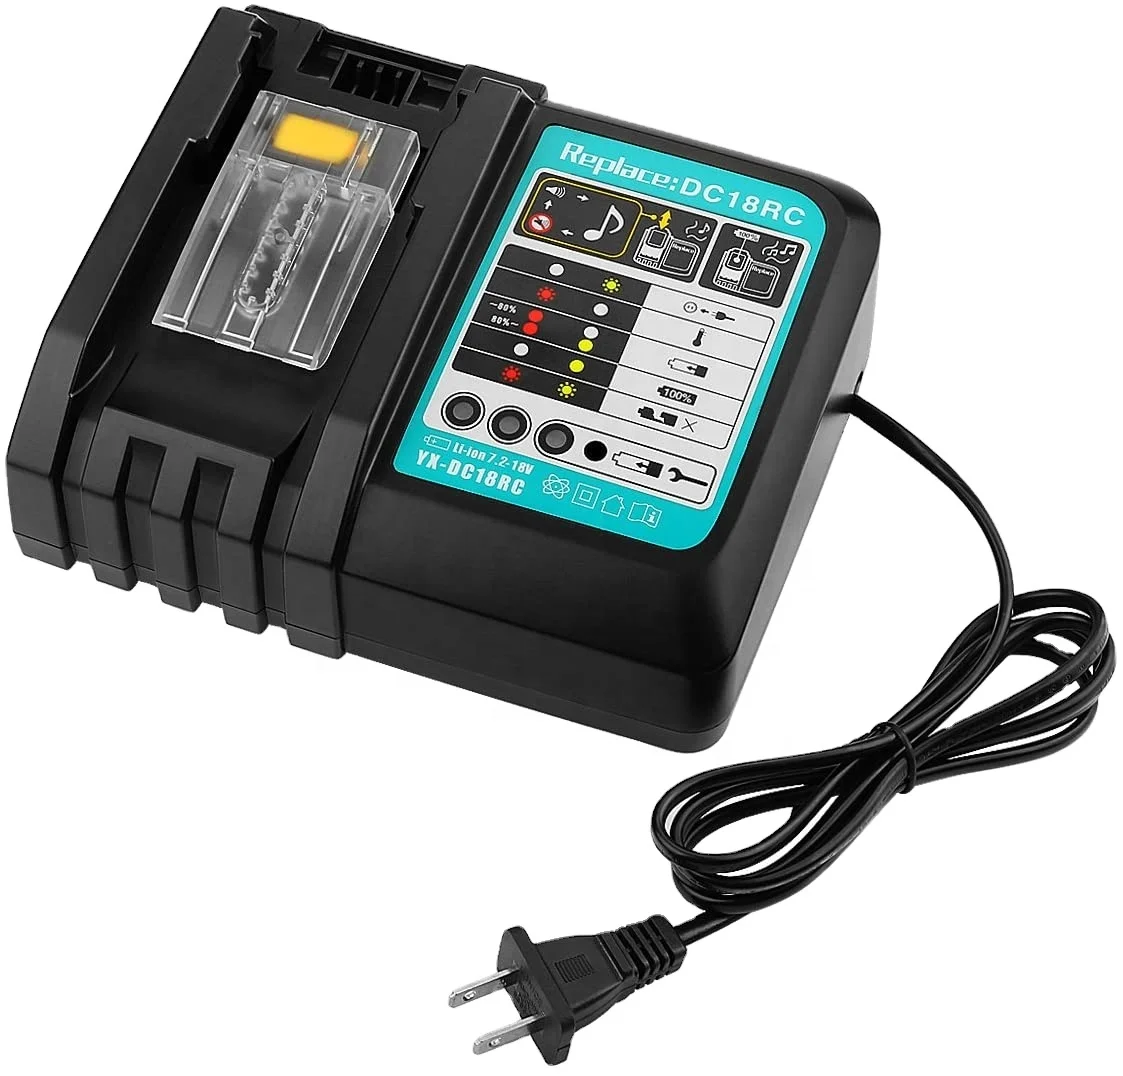 Makita DC18RC T 18V Lithium-Ion Rapid Battery Charger for sale online 